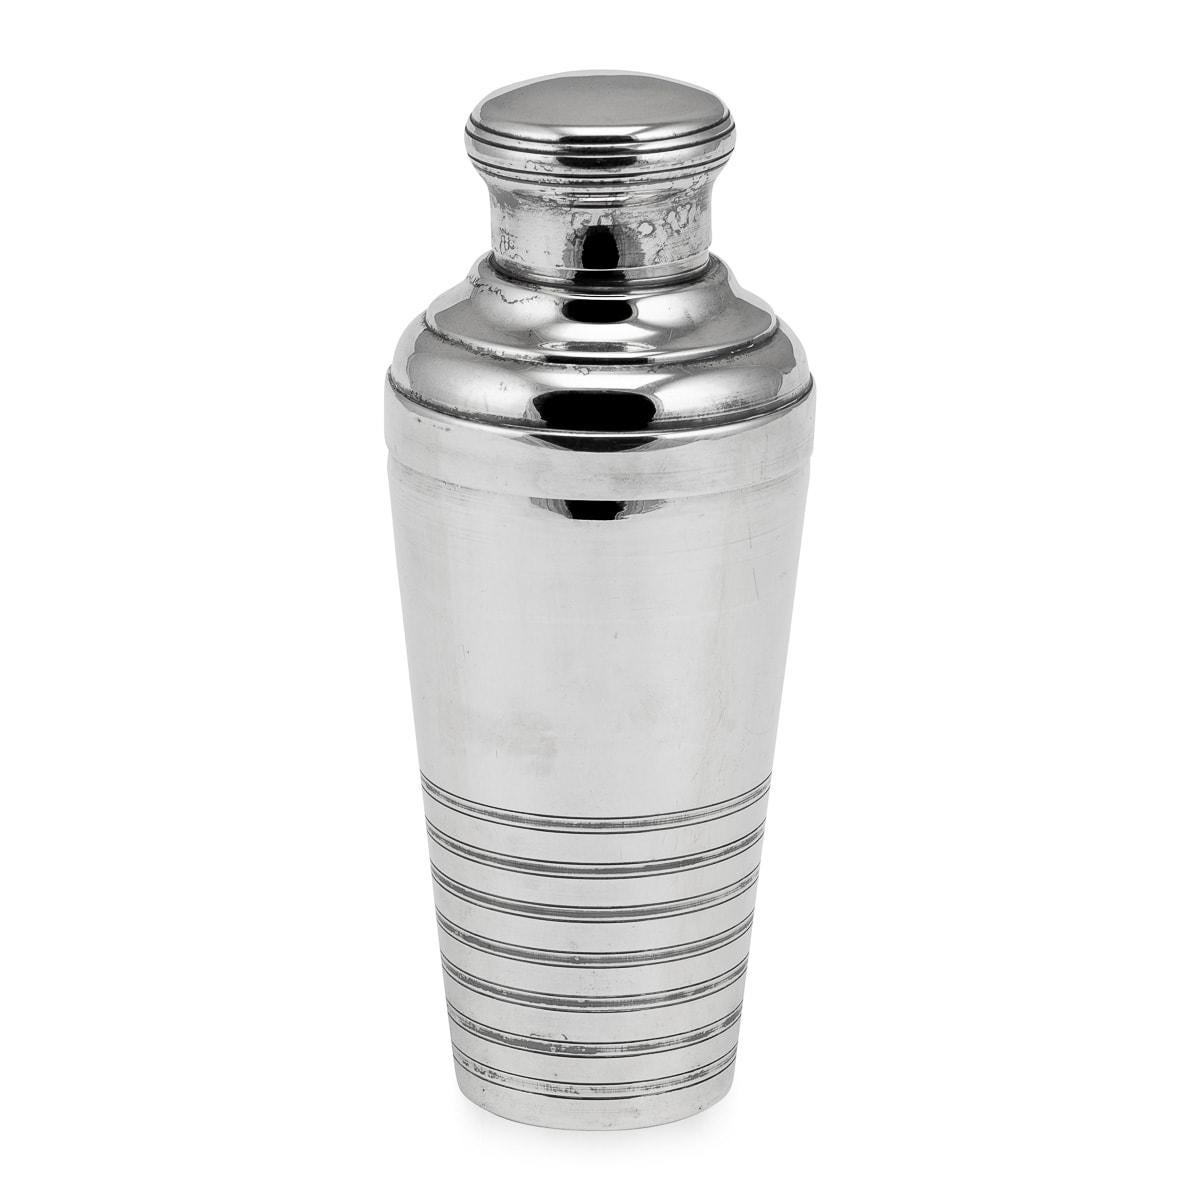 A charming silver plated cocktail shaker, of French origin and dating back to the mid-20th century. Exquisite in its craftsmanship, the cocktail shaker is of clear Art Deco form, reminiscent of the distinctive designs that characterised the early